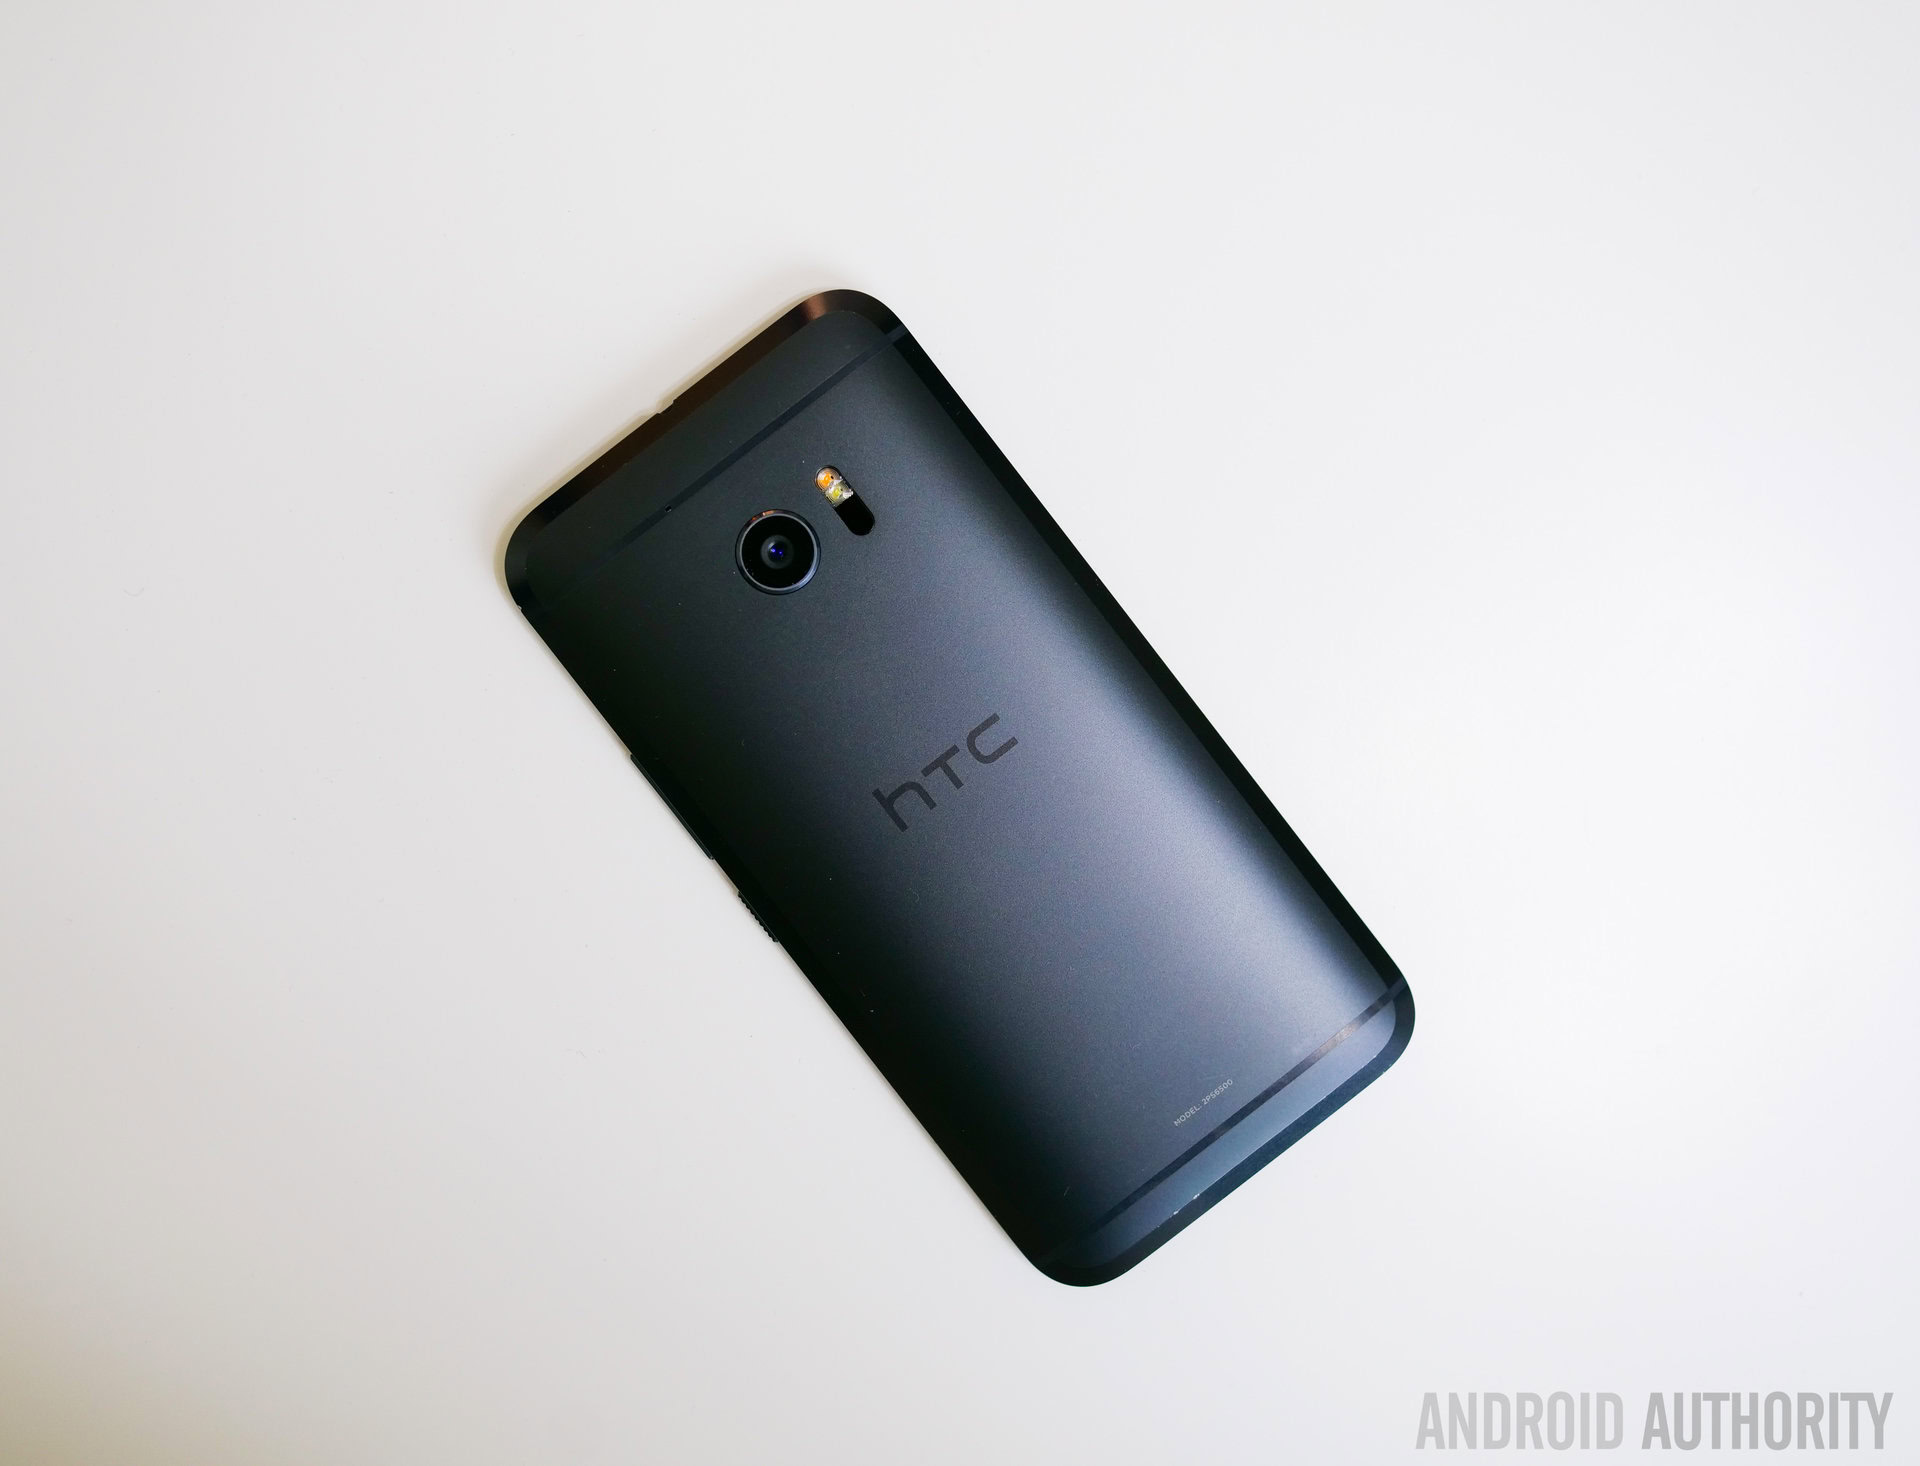 dempen koffie Troosteloos HTC U11, HTCU Ultra and HTC10 will get Android Oreo, confirms HTC